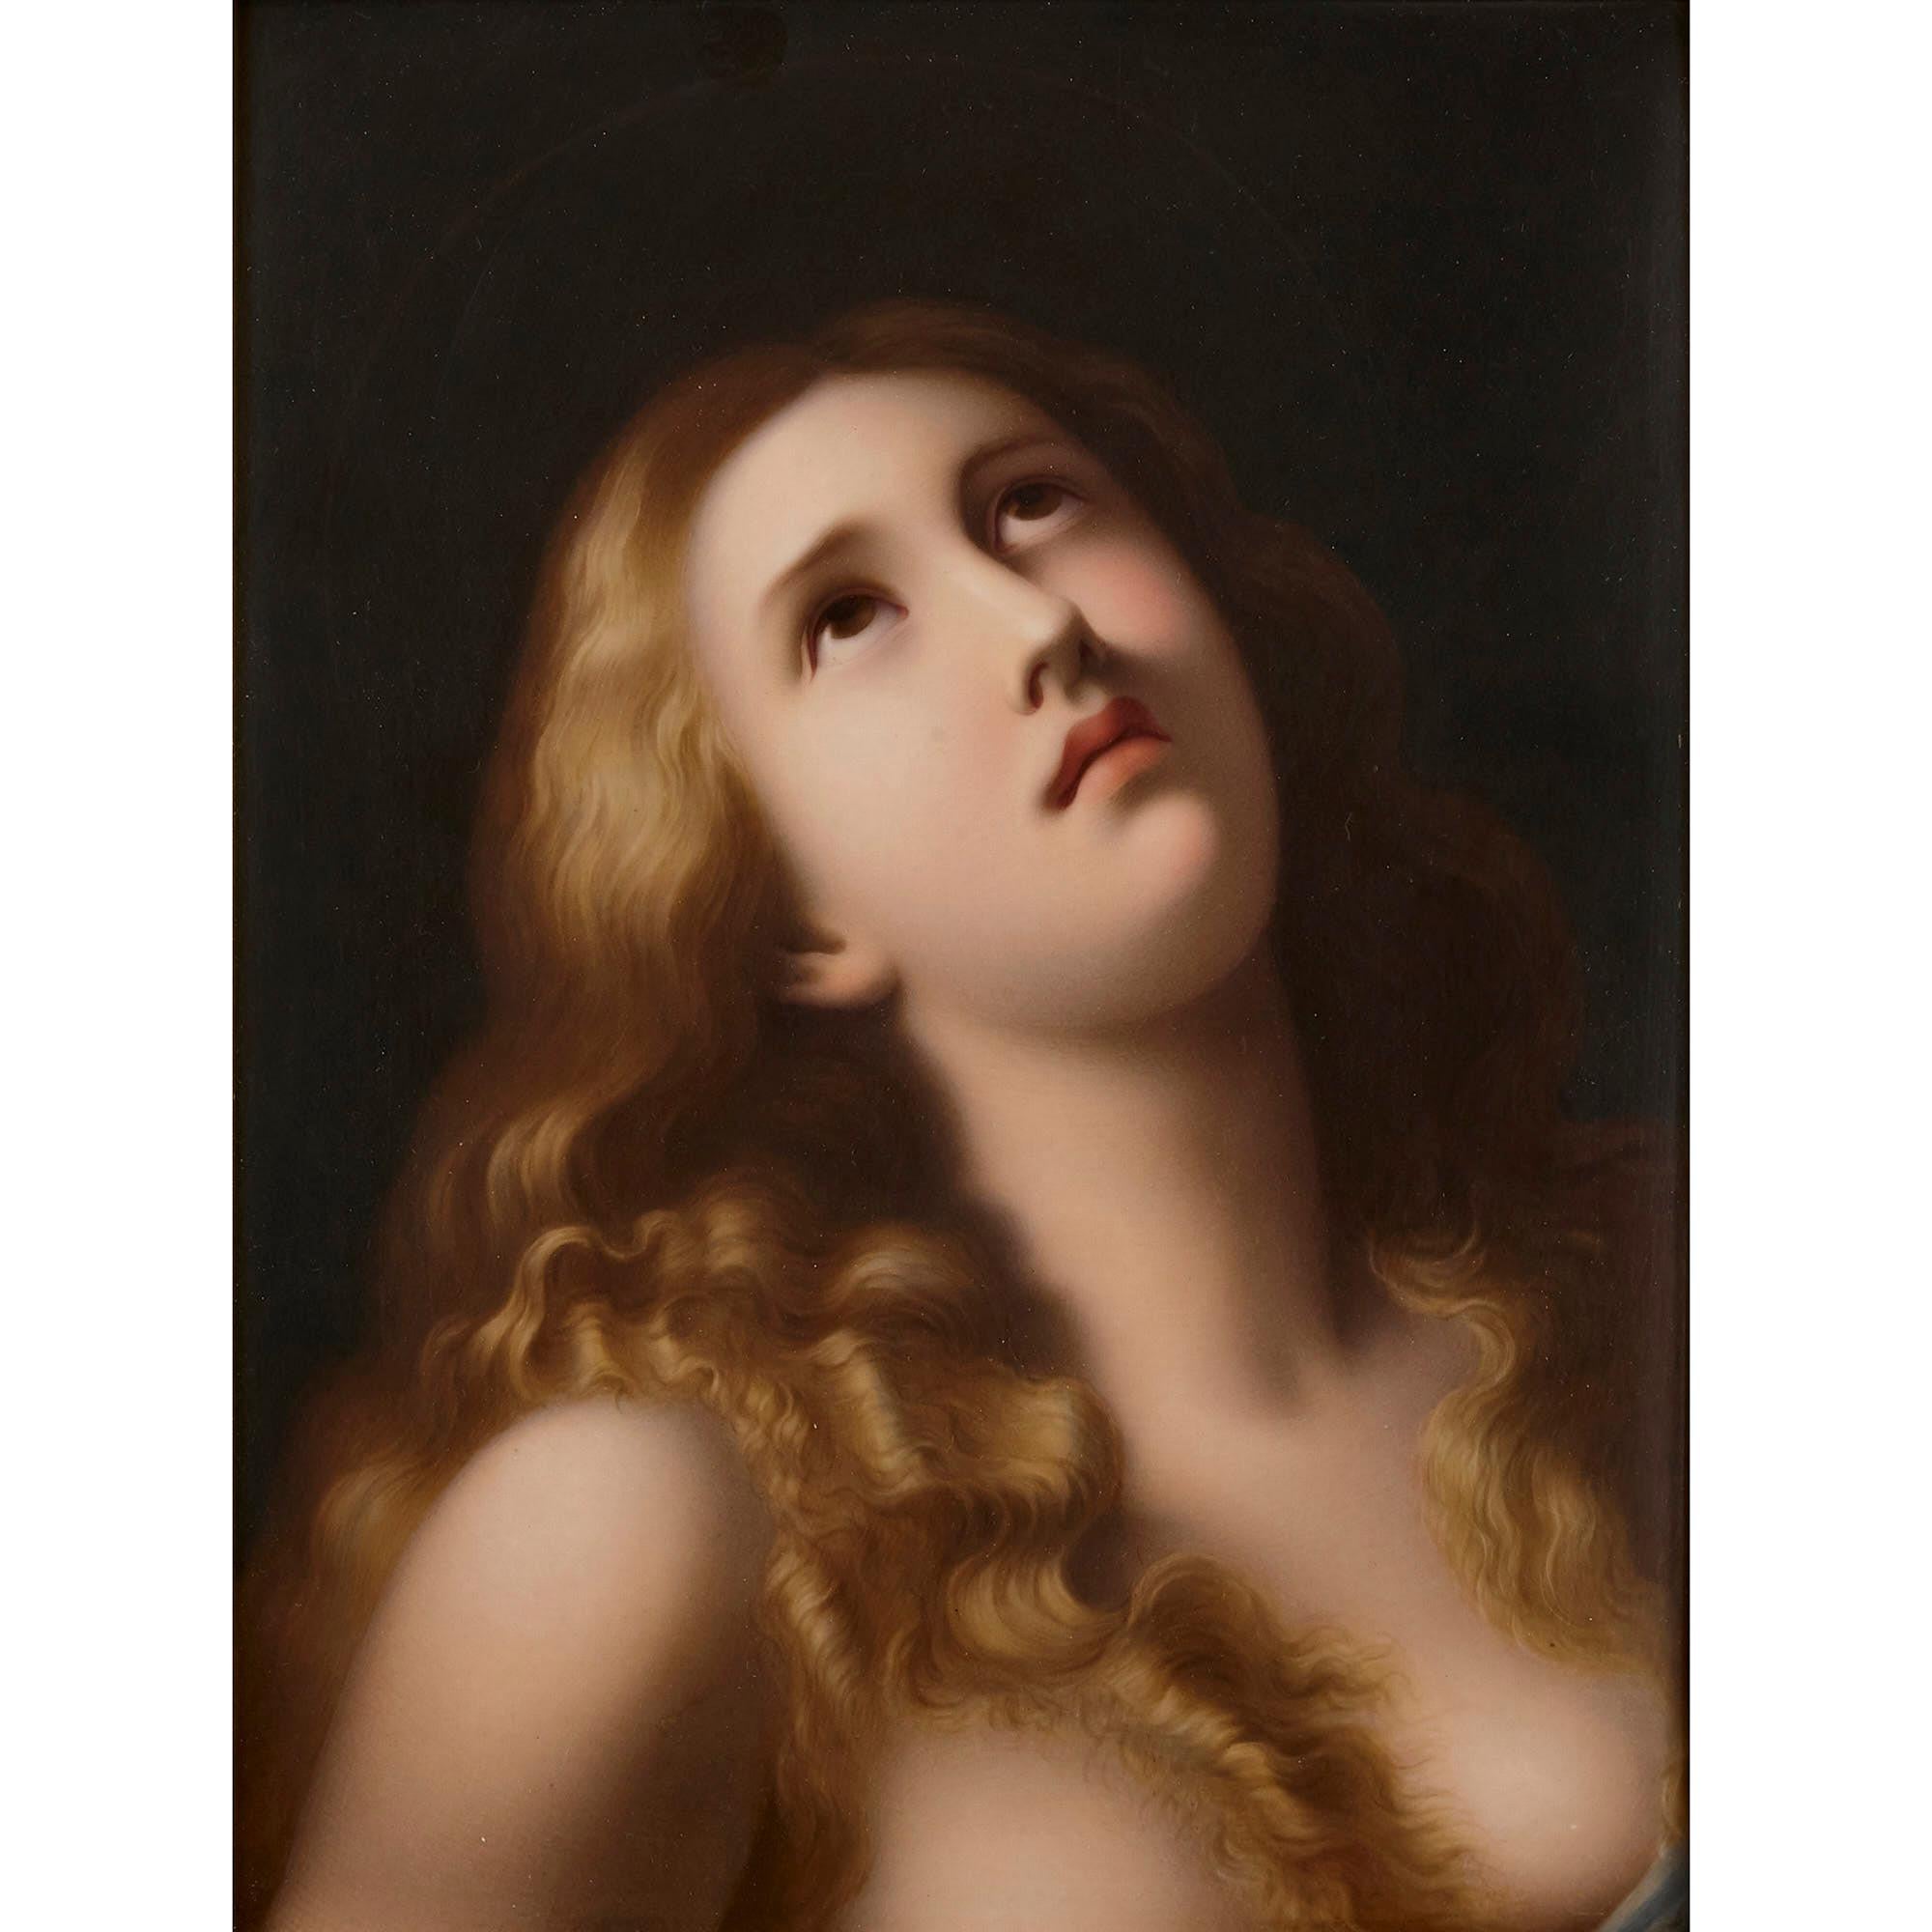 Porcelain plaque painted with Mary Magdalene by K.P.M.
German, circa 1900
Measures: Frame: Height 32.5cm, width 26.5cm, depth 3cm
Plaque: Height 25.5cm, width 19cm, depth 0.5cm

This magnificent porcelain plaque, the porcelain by the important